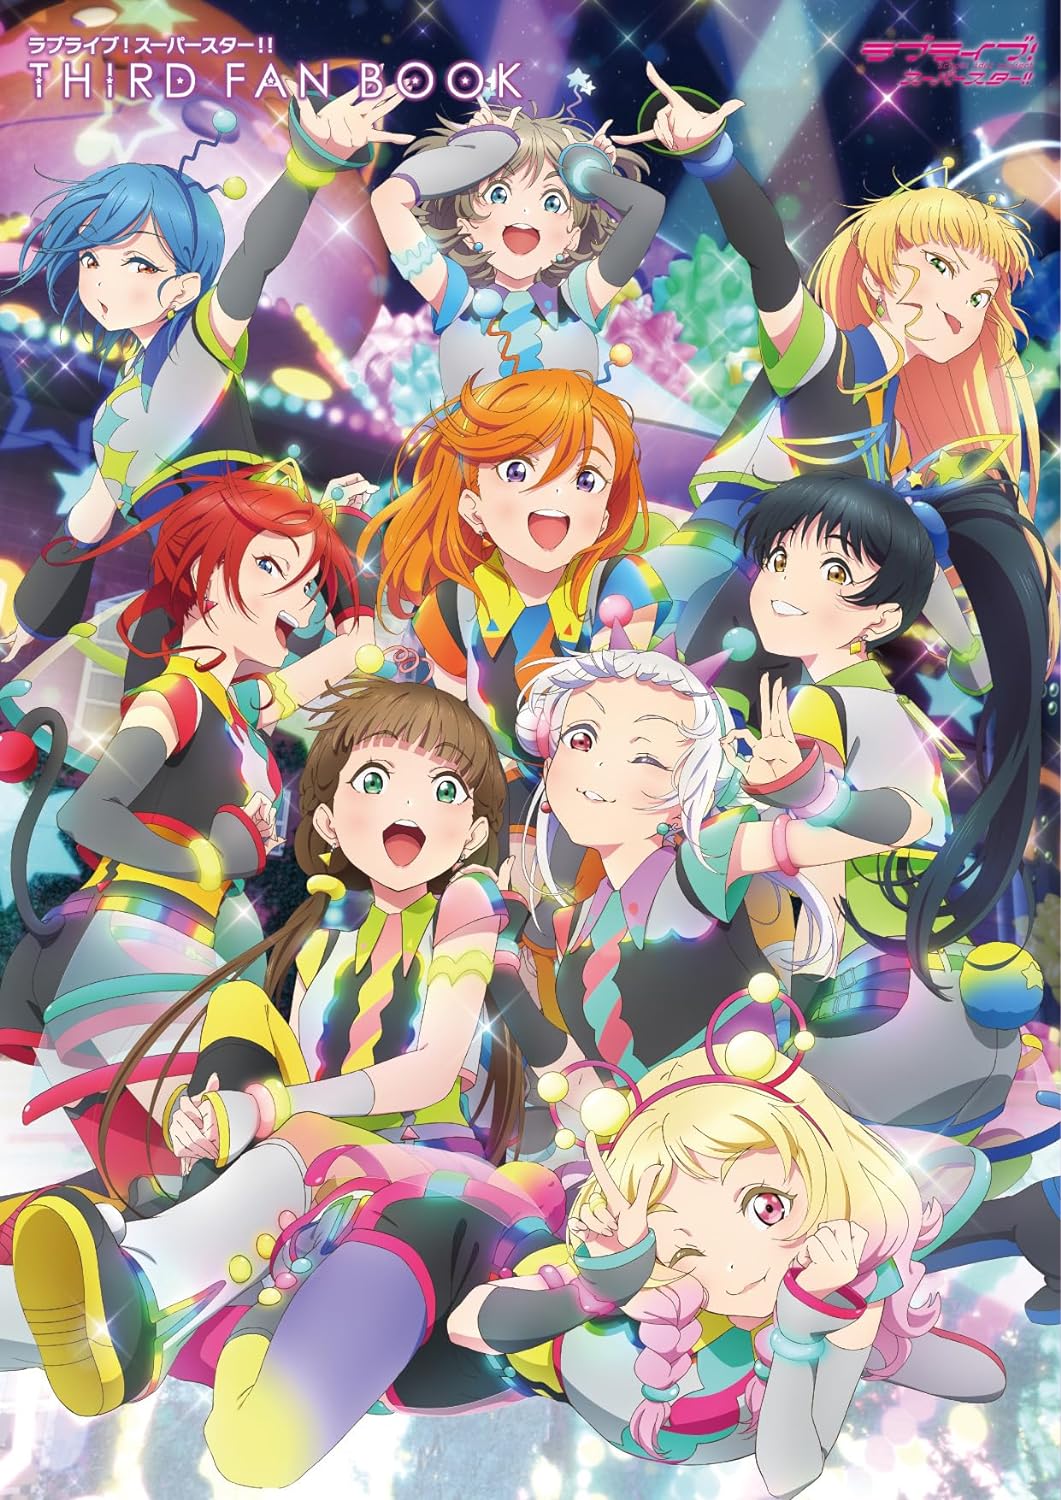 Streaming+] Love Live! Superstar!! Liella! 3rd LoveLive! ～WE WILL